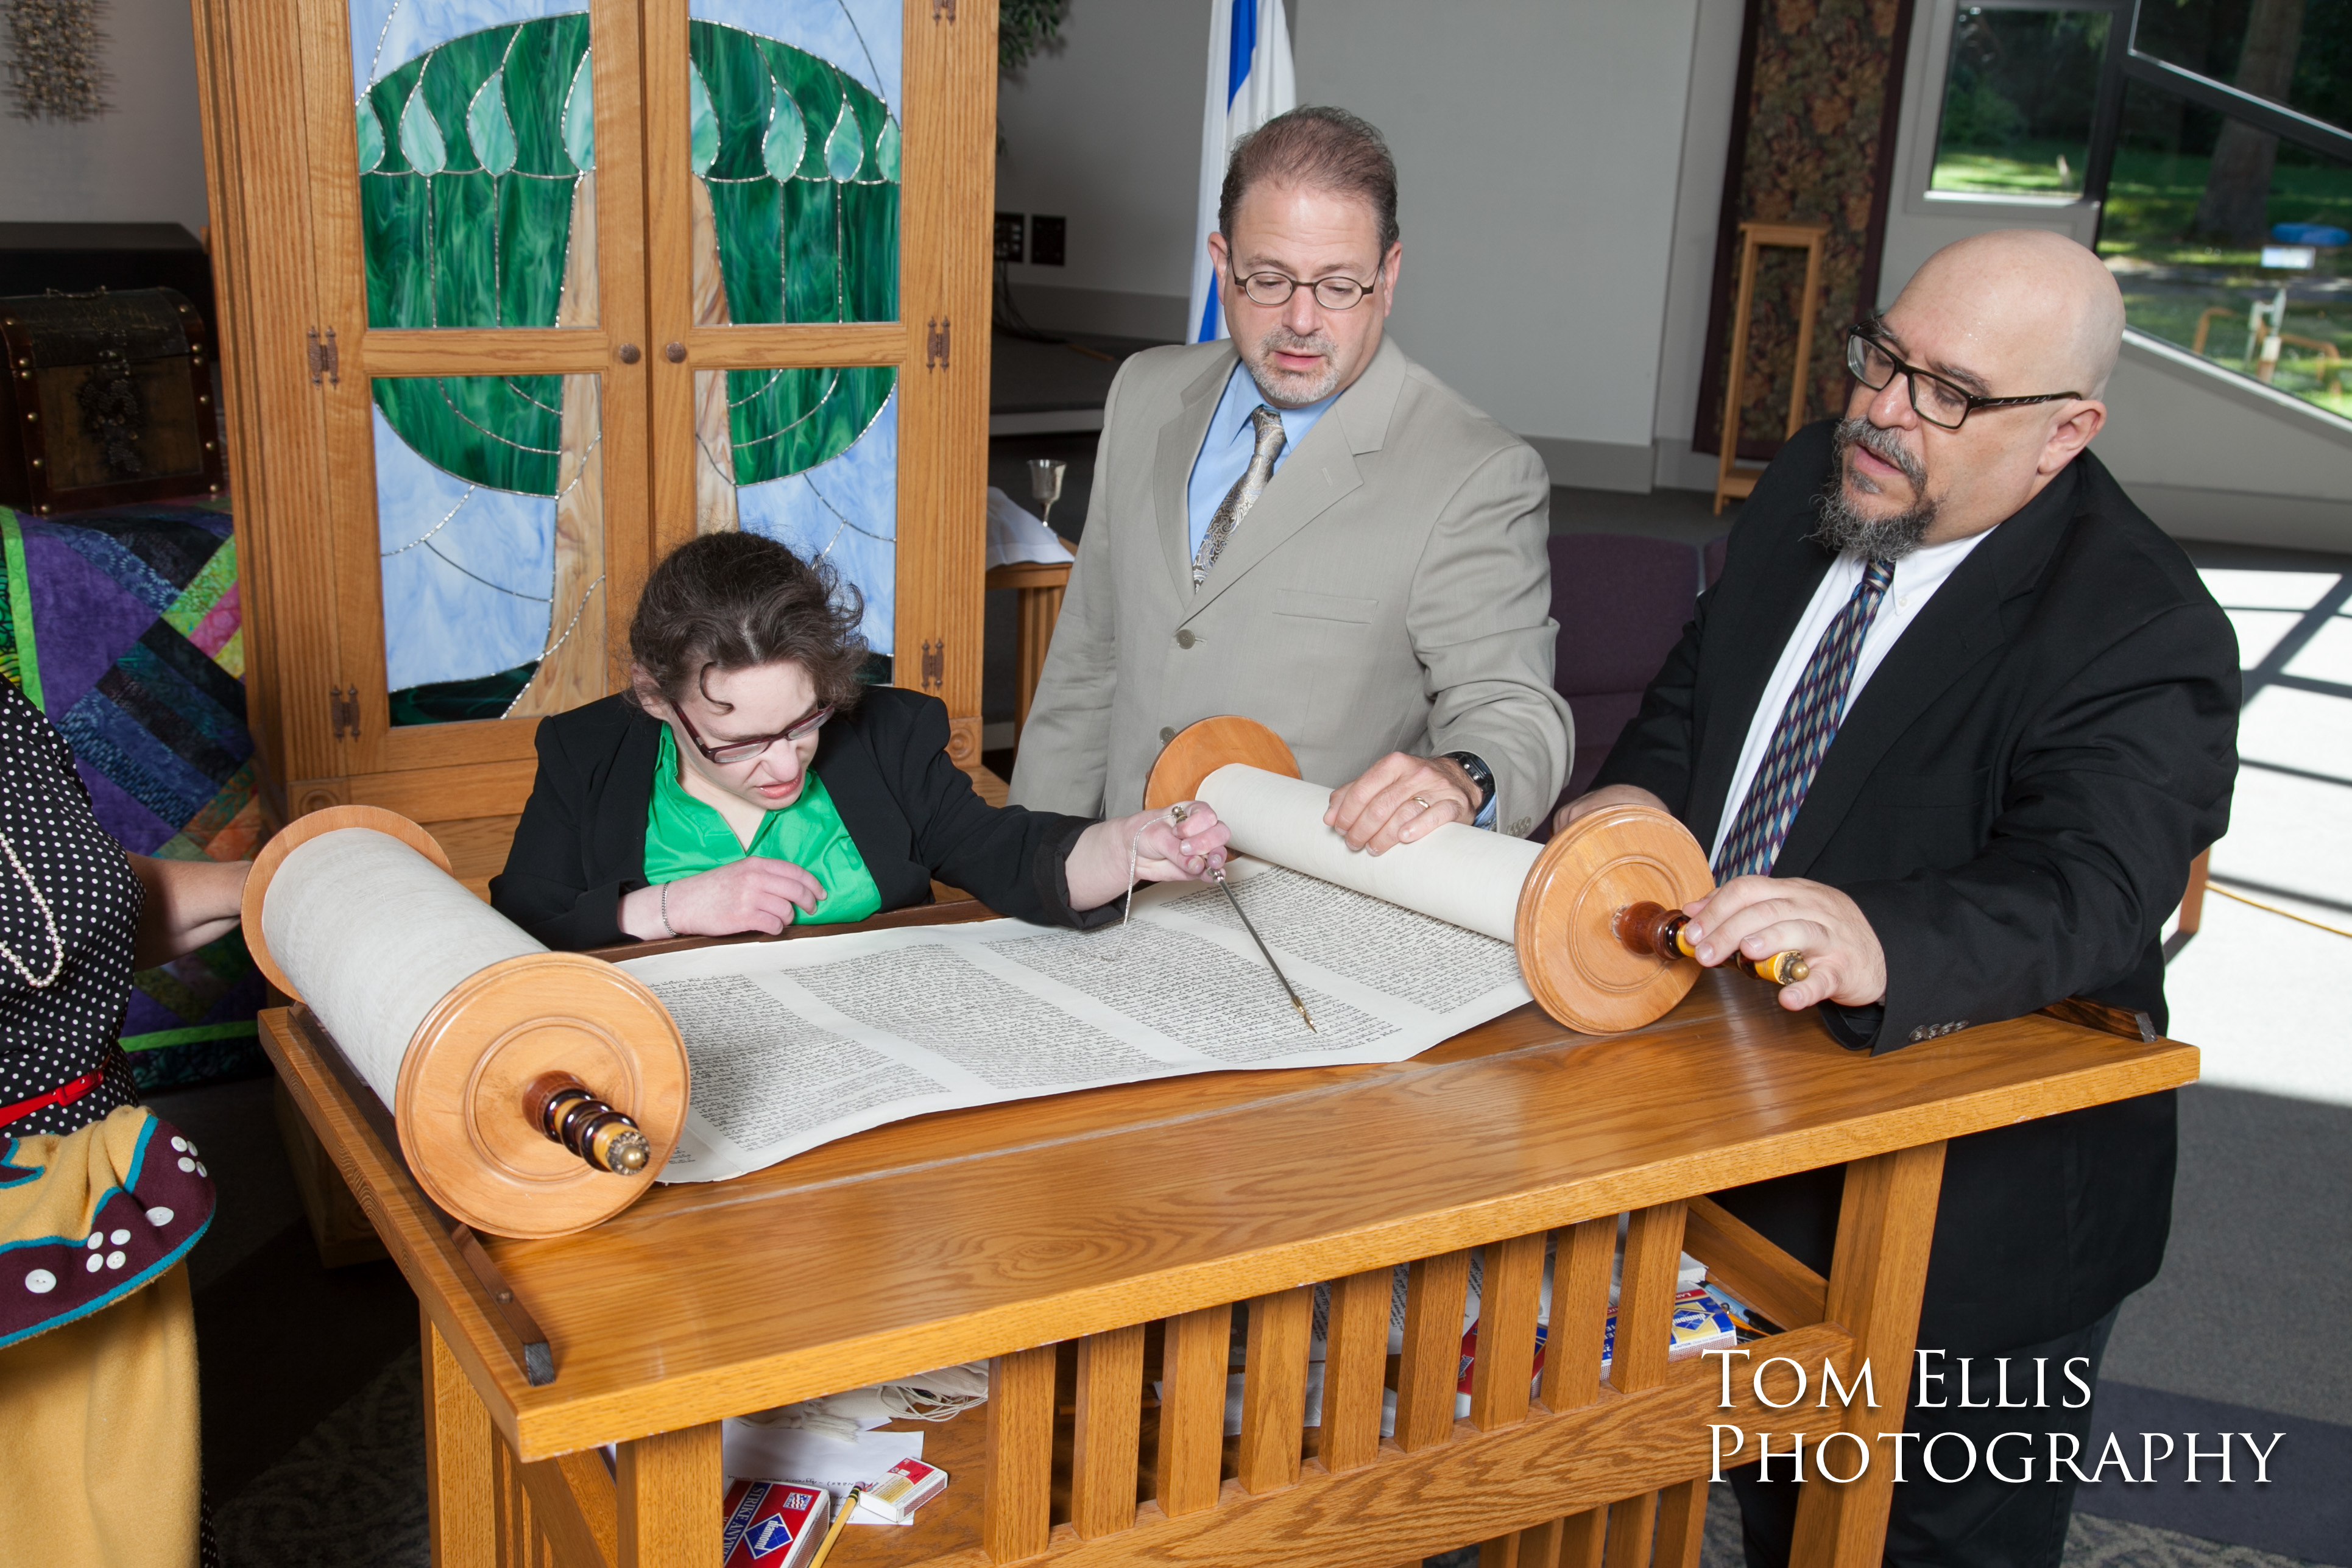 Becca reads the Torah at her Bat Mitzvah while her father and the Rabbi watch